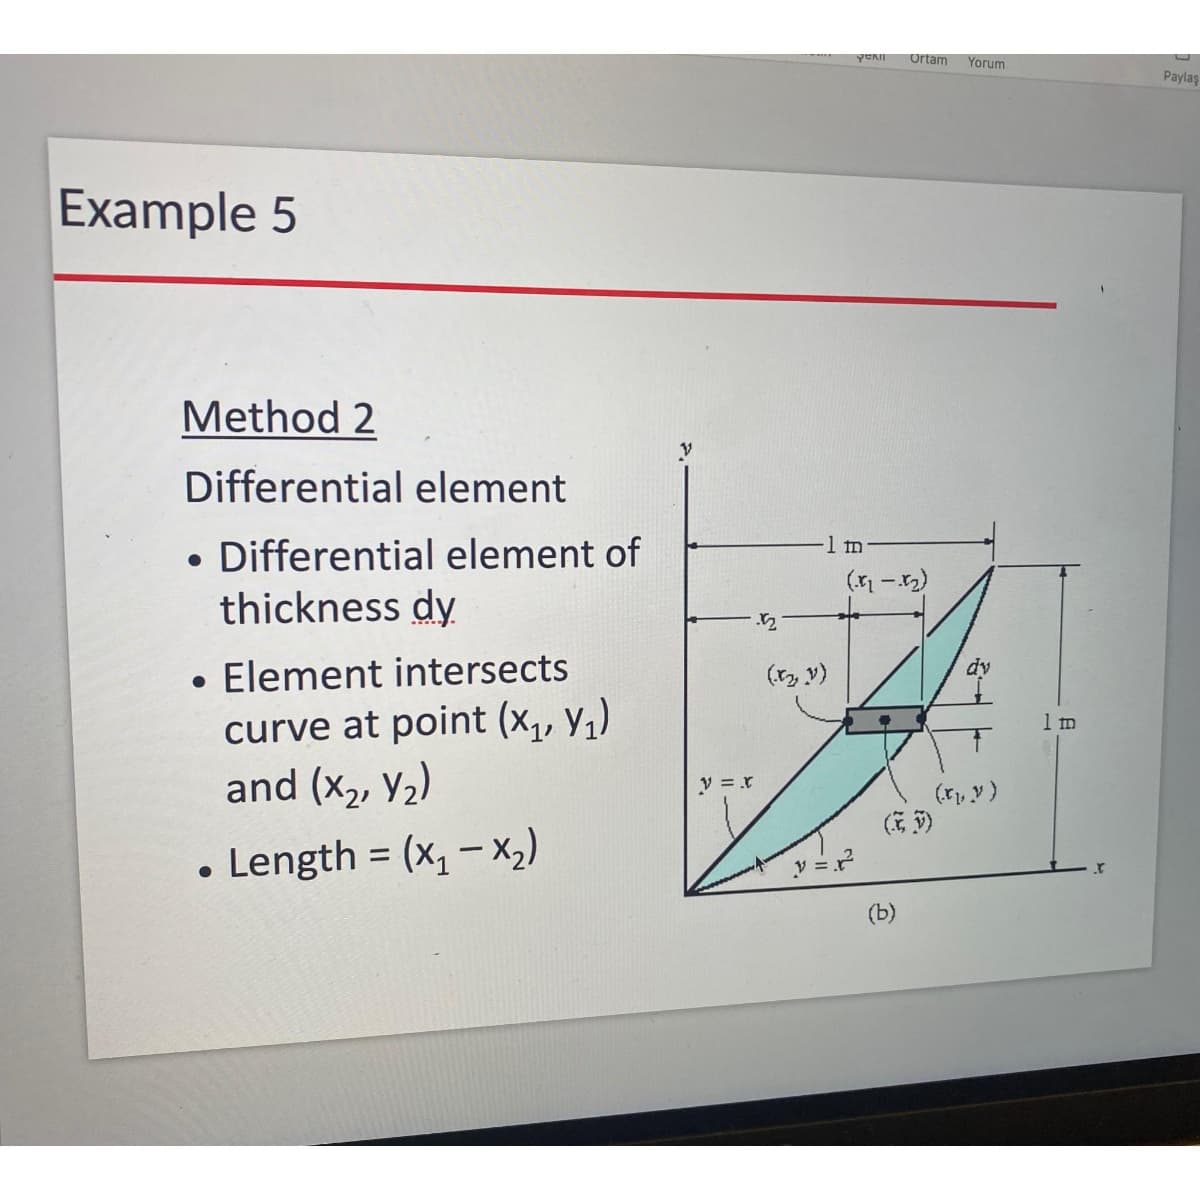 Example 5
Method 2
Differential element
• Differential element of
●
thickness dy
●
●
Element intersects
curve at point (x₁, y₁)
and (x₂, Y₂)
Length = (x₁ - x₂)
V=X
5
Pekil Ortam Yorum
1 m
(x₂, v)
(.₂ -.1₂)
(b)
24
(.x, y)
1 m
Paylaş